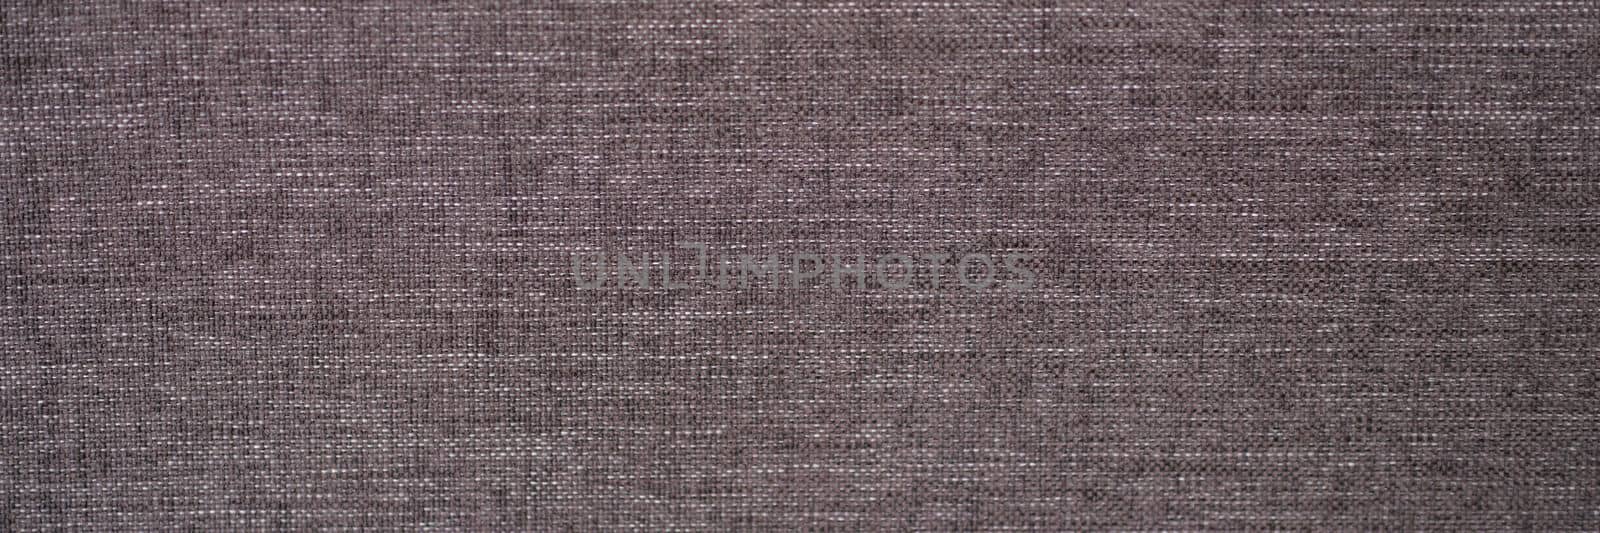 Dark gray brown fabric textile background. Quality linen fabric by kuprevich